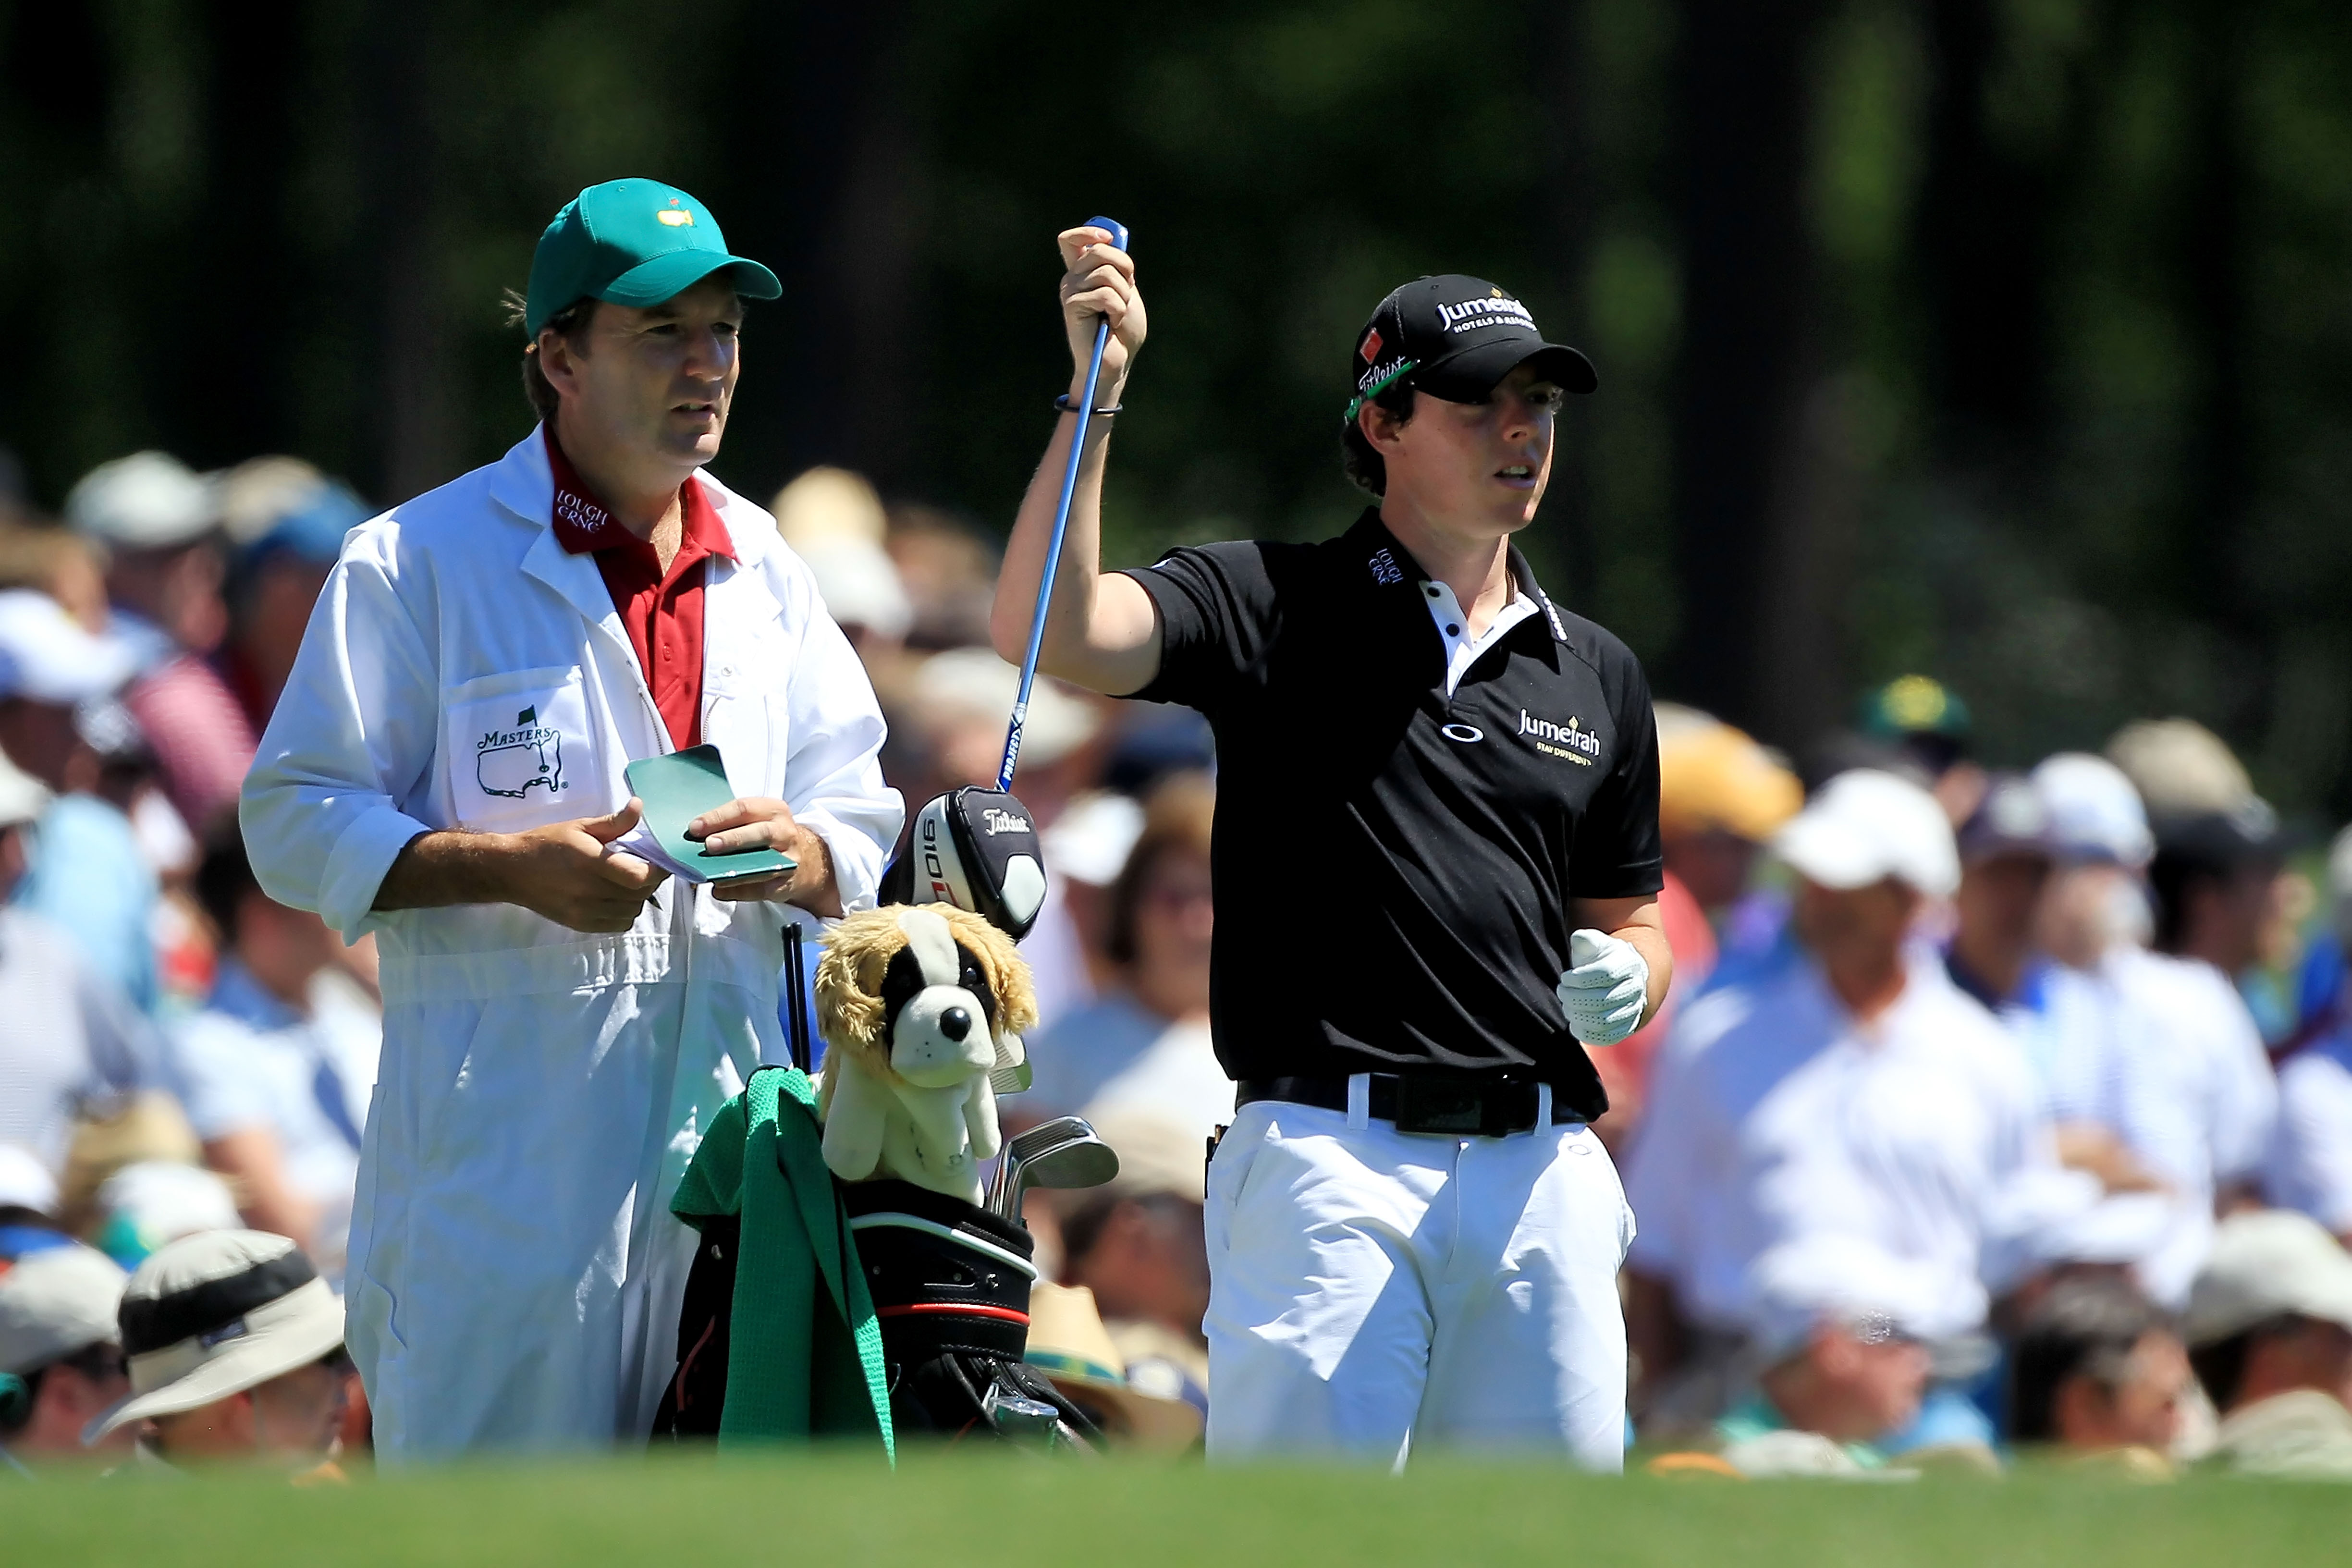 AUGUSTA, GA - APRIL 07:  Rory McIlroy of Northern Ireland pulls a club alongside his caddie J.P. Fitzgerald on the 12th hole during the first round of the 2011 Masters Tournament at Augusta National Golf Club on April 7, 2011 in Augusta, Georgia.  (Photo